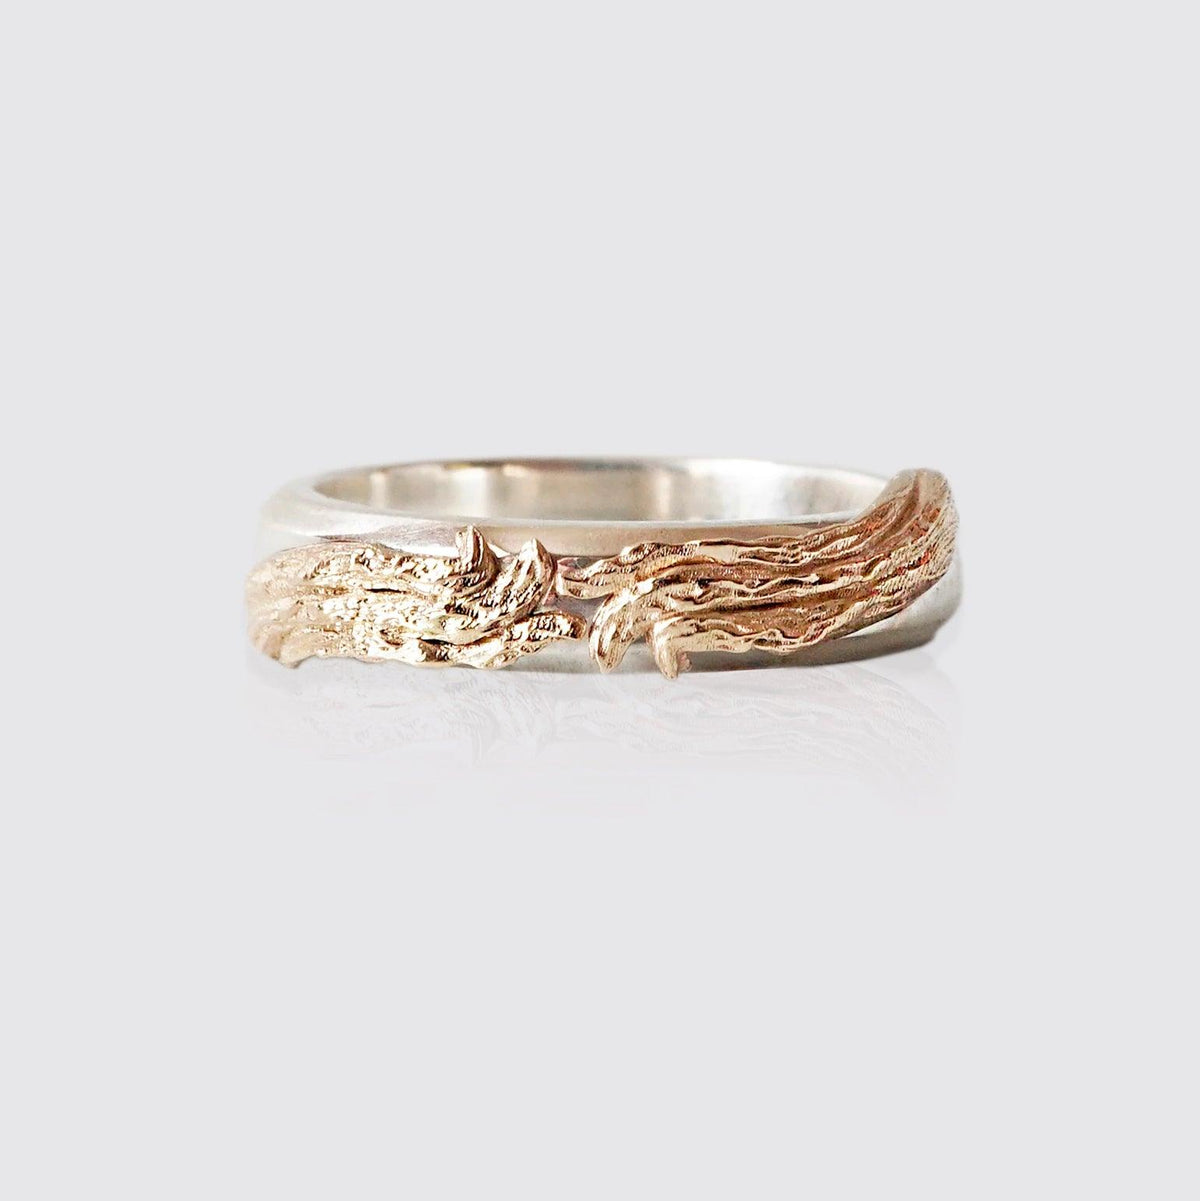 Mixed Metal Tree Branch Ring in Sterling Silver and 14K Gold, 5mm